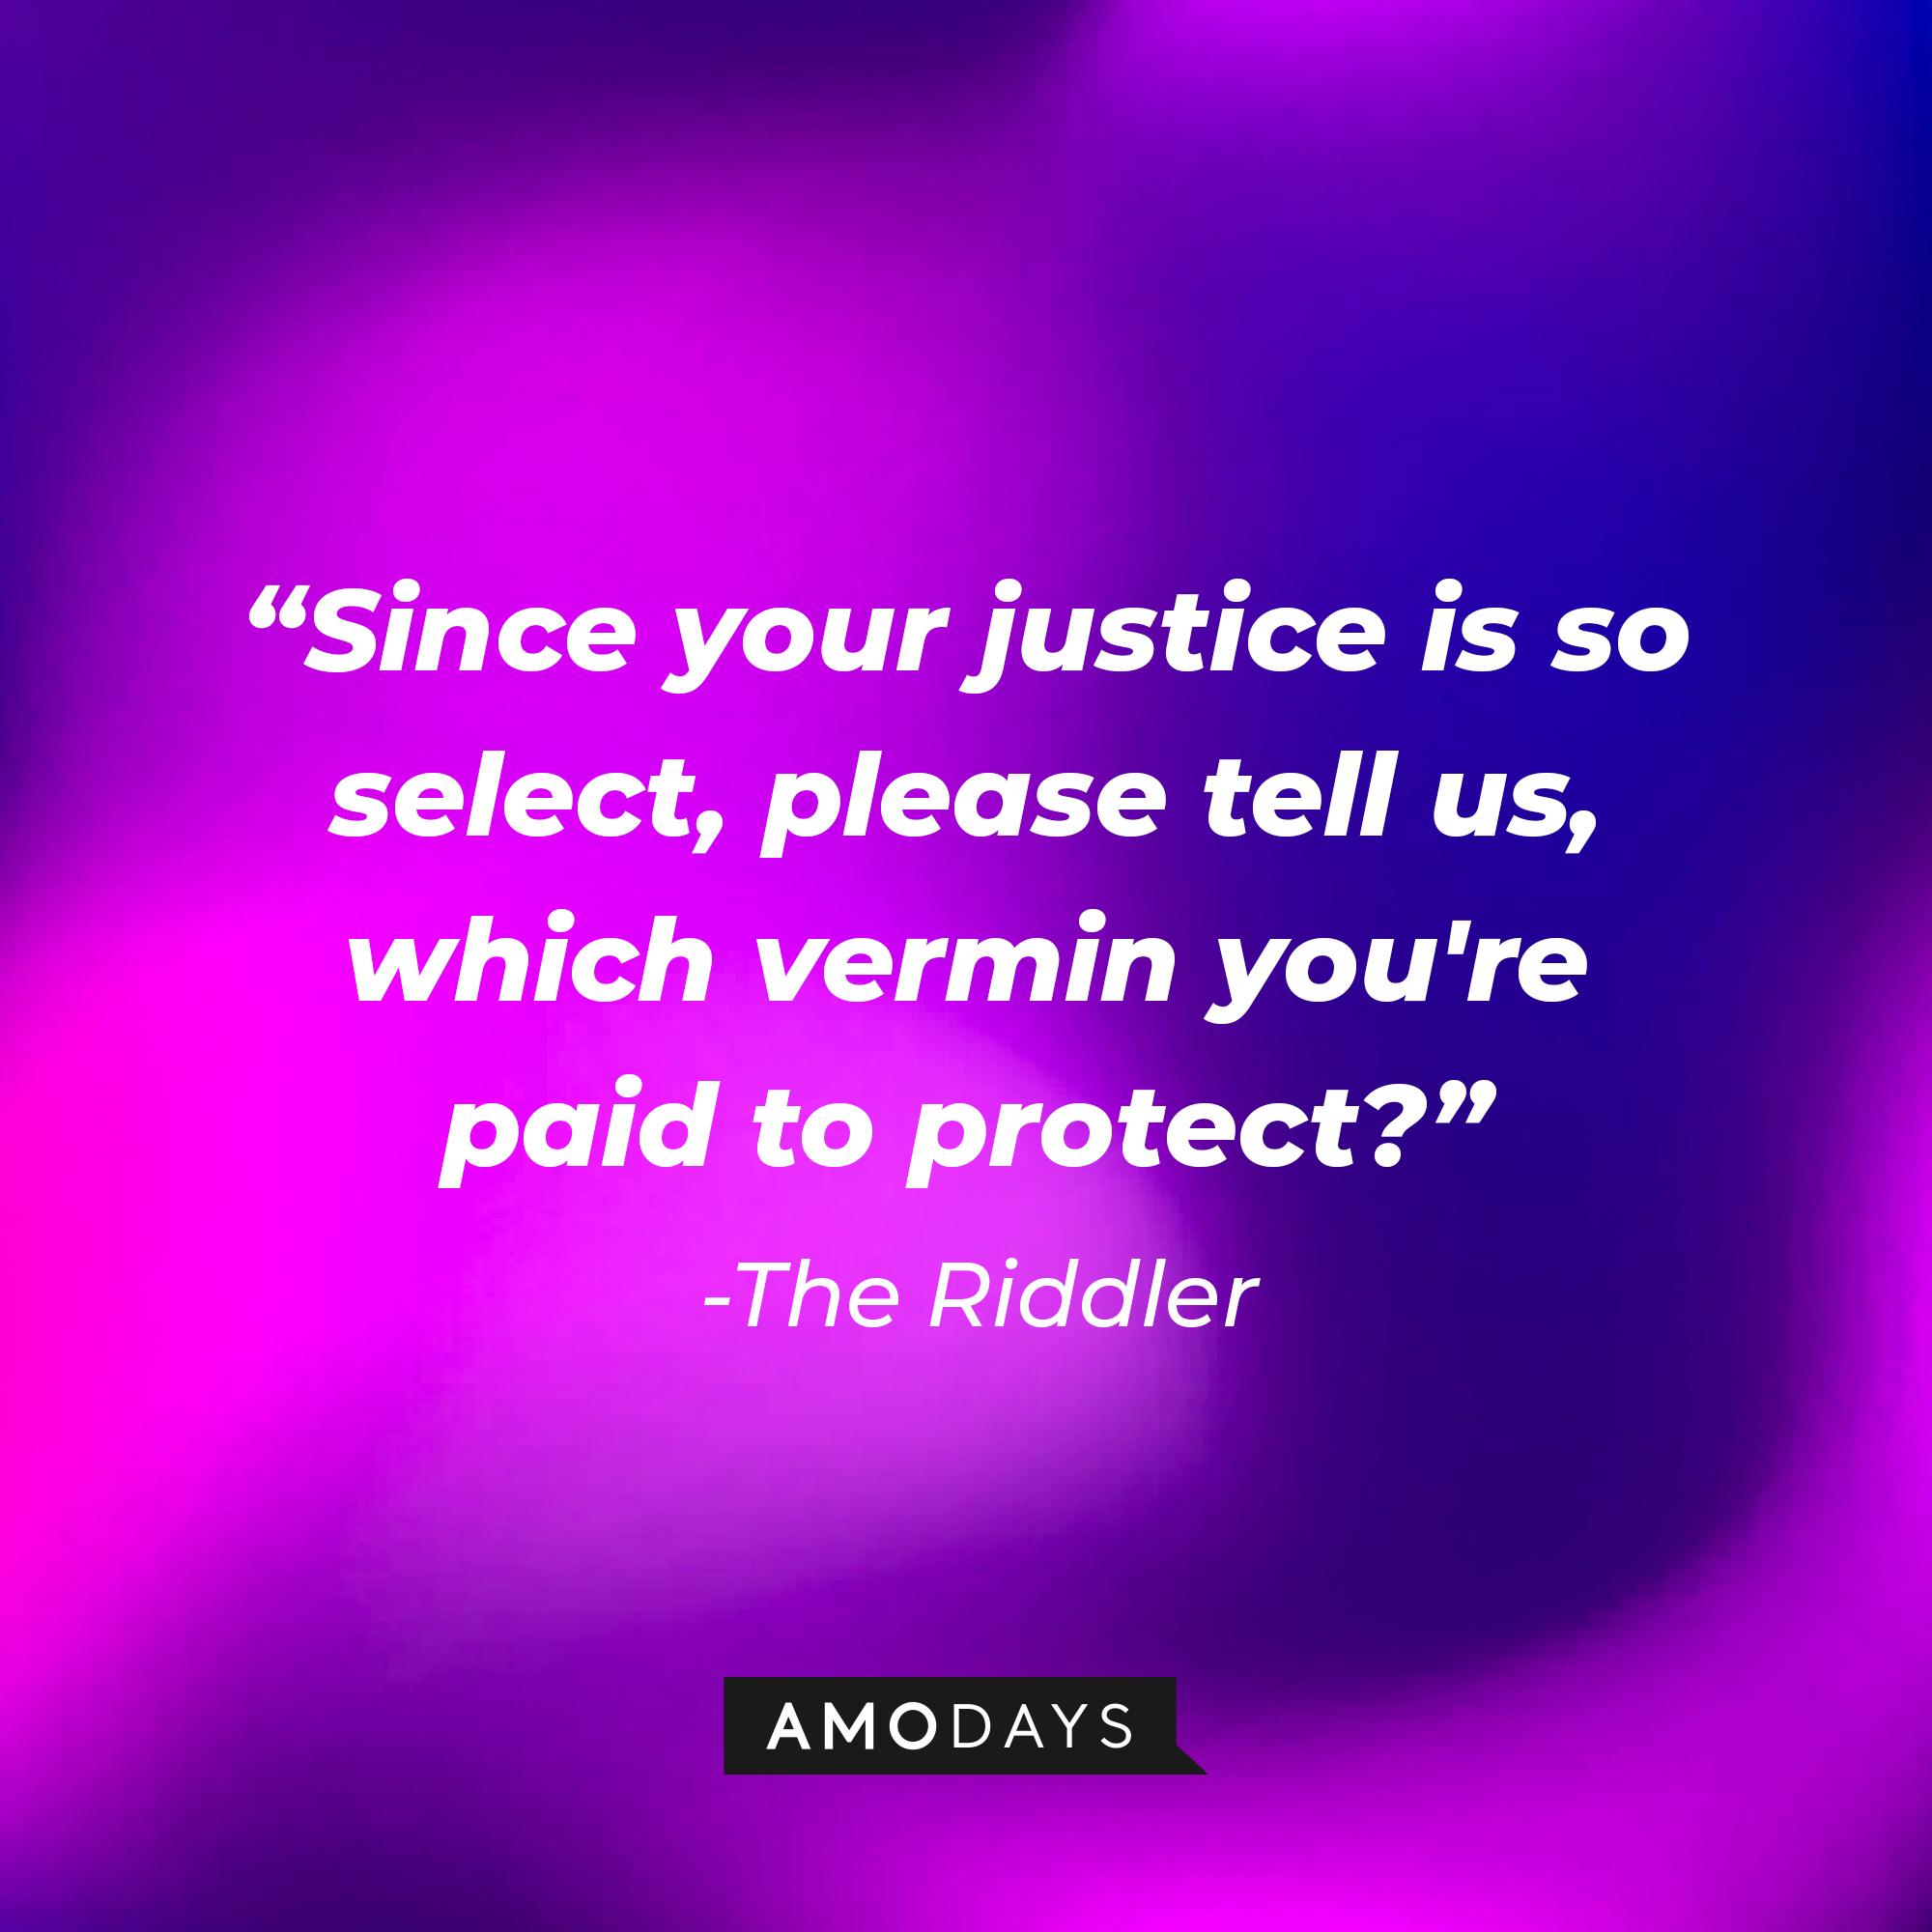 The Riddler's quote: “Since your justice is so select, please tell us, which vermin you're paid to protect?” | Amodays